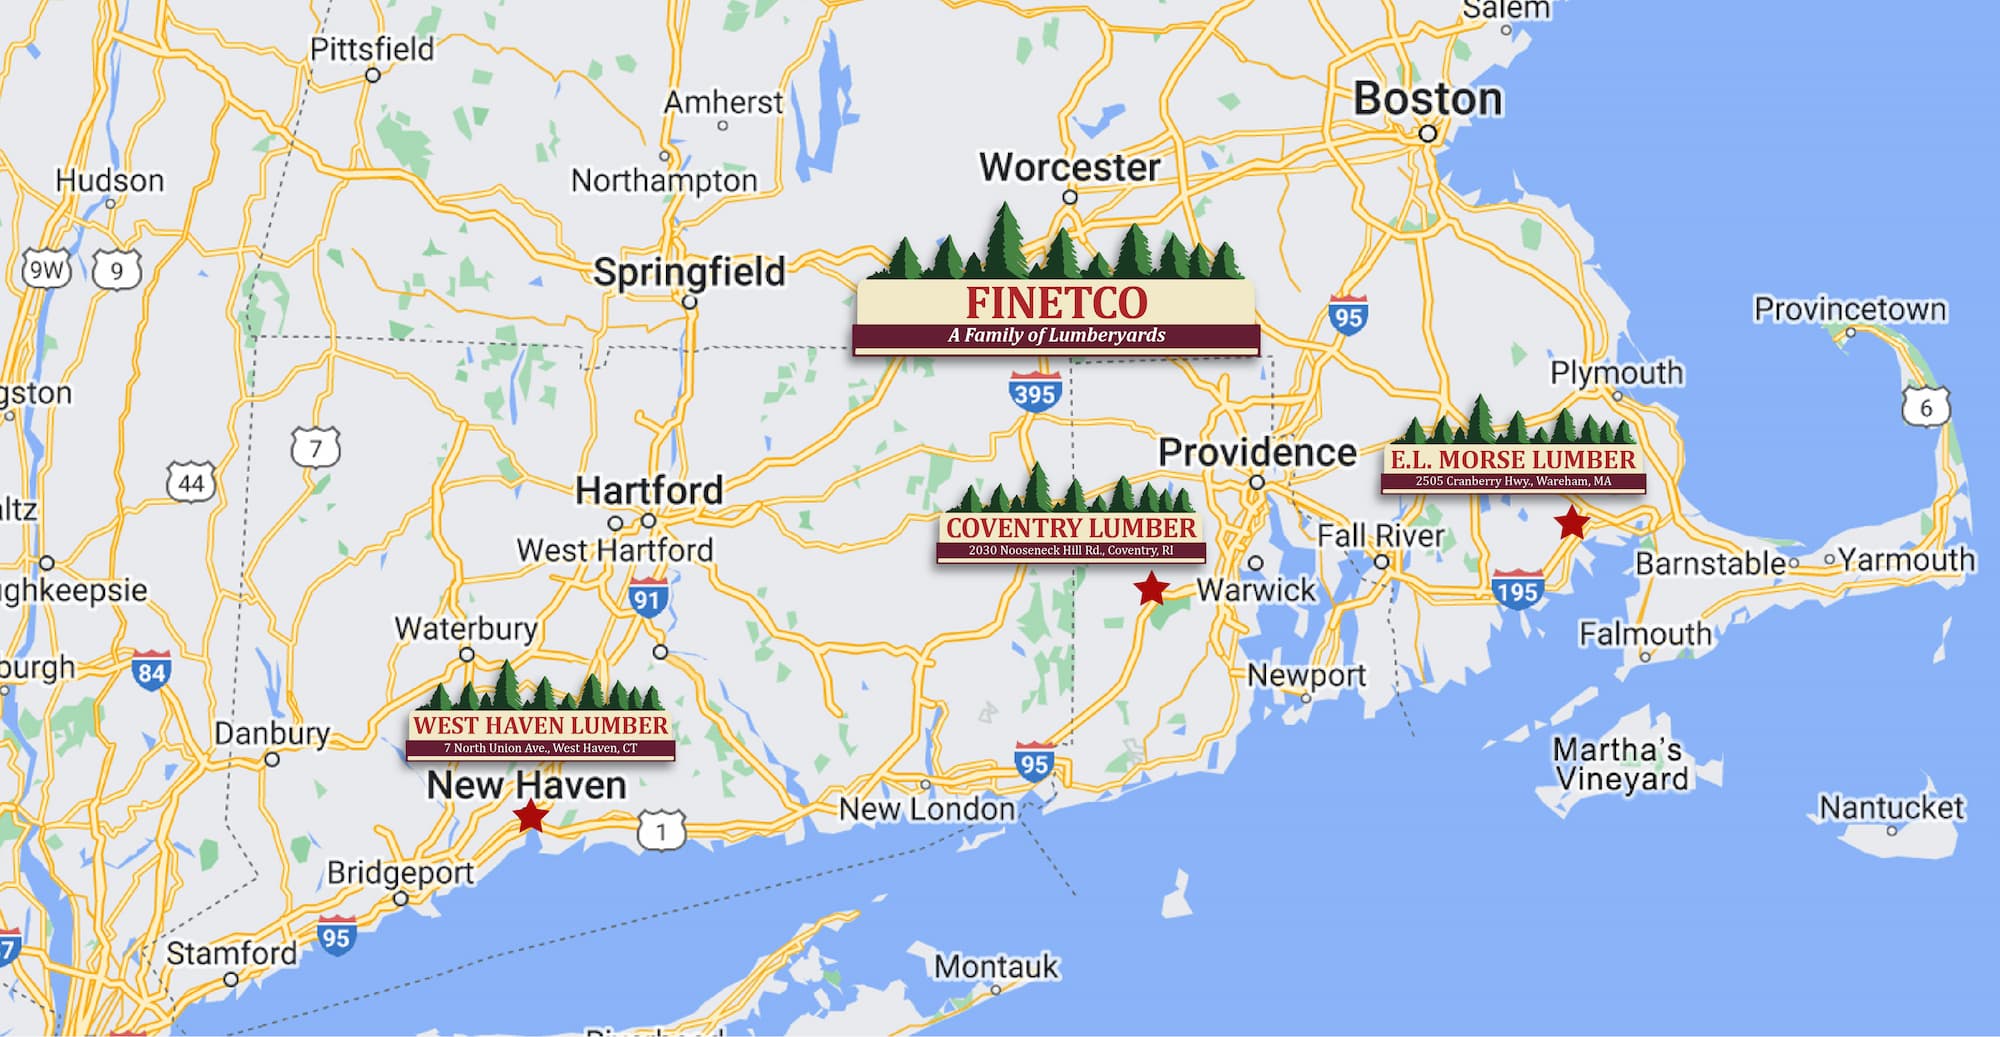 Finetco Map of locations in New England